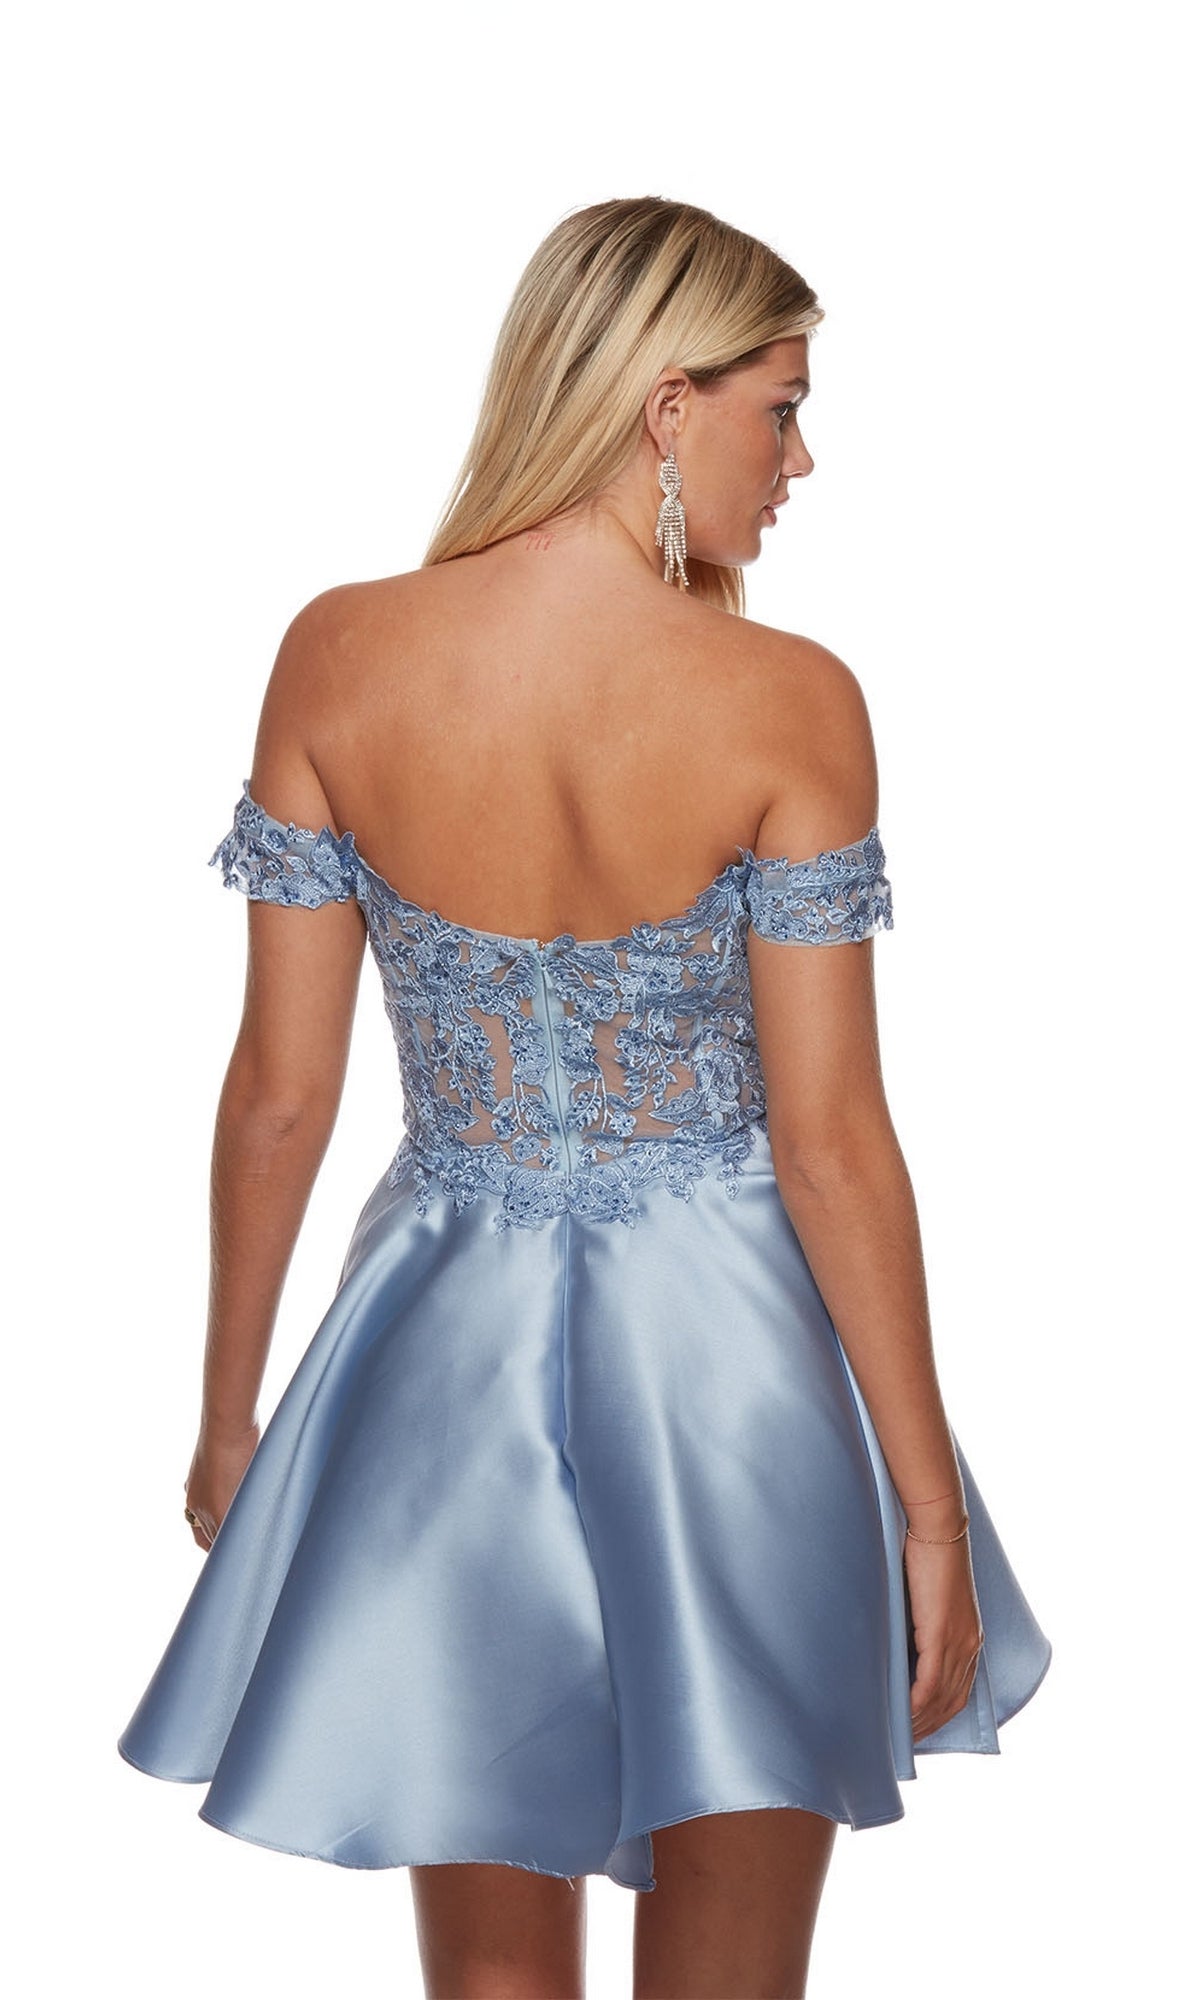  Short Dress By Alyce For Homecoming 3141